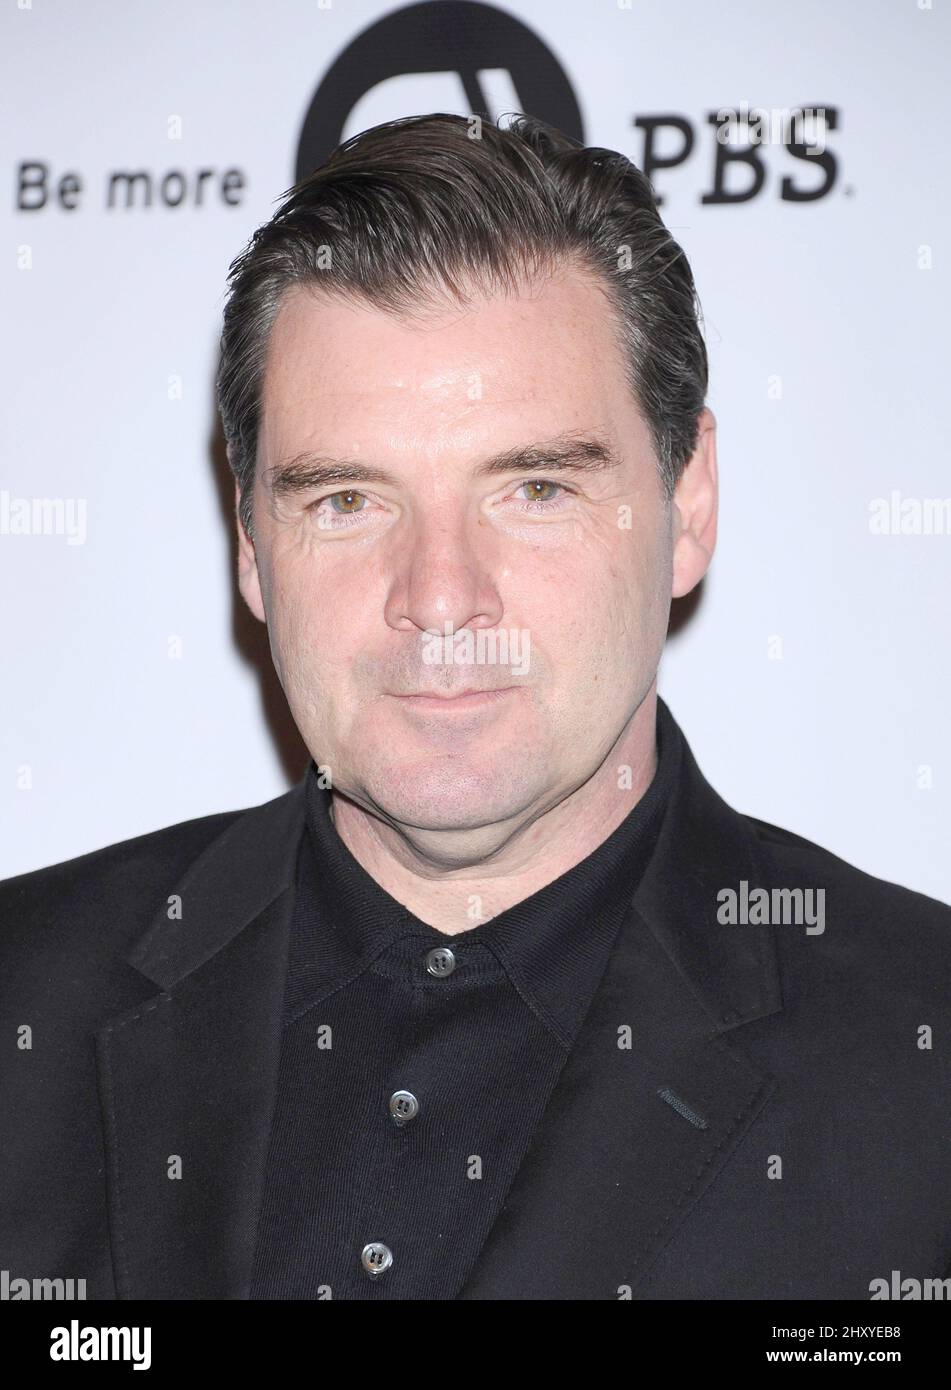 Brendan Coyle during the 'Downton Abbey' photo call held at the Beverly Hilton Hotel, California Stock Photo